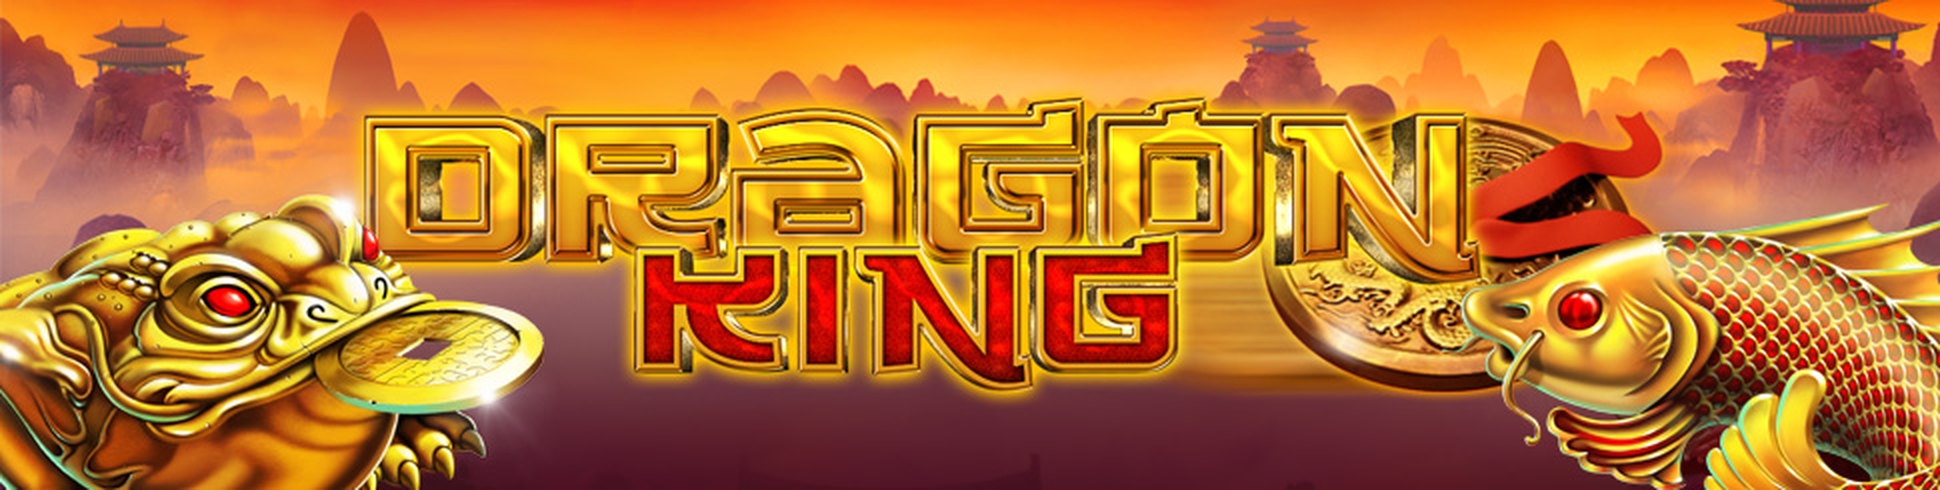 The Dragon King Online Slot Demo Game by GameArt